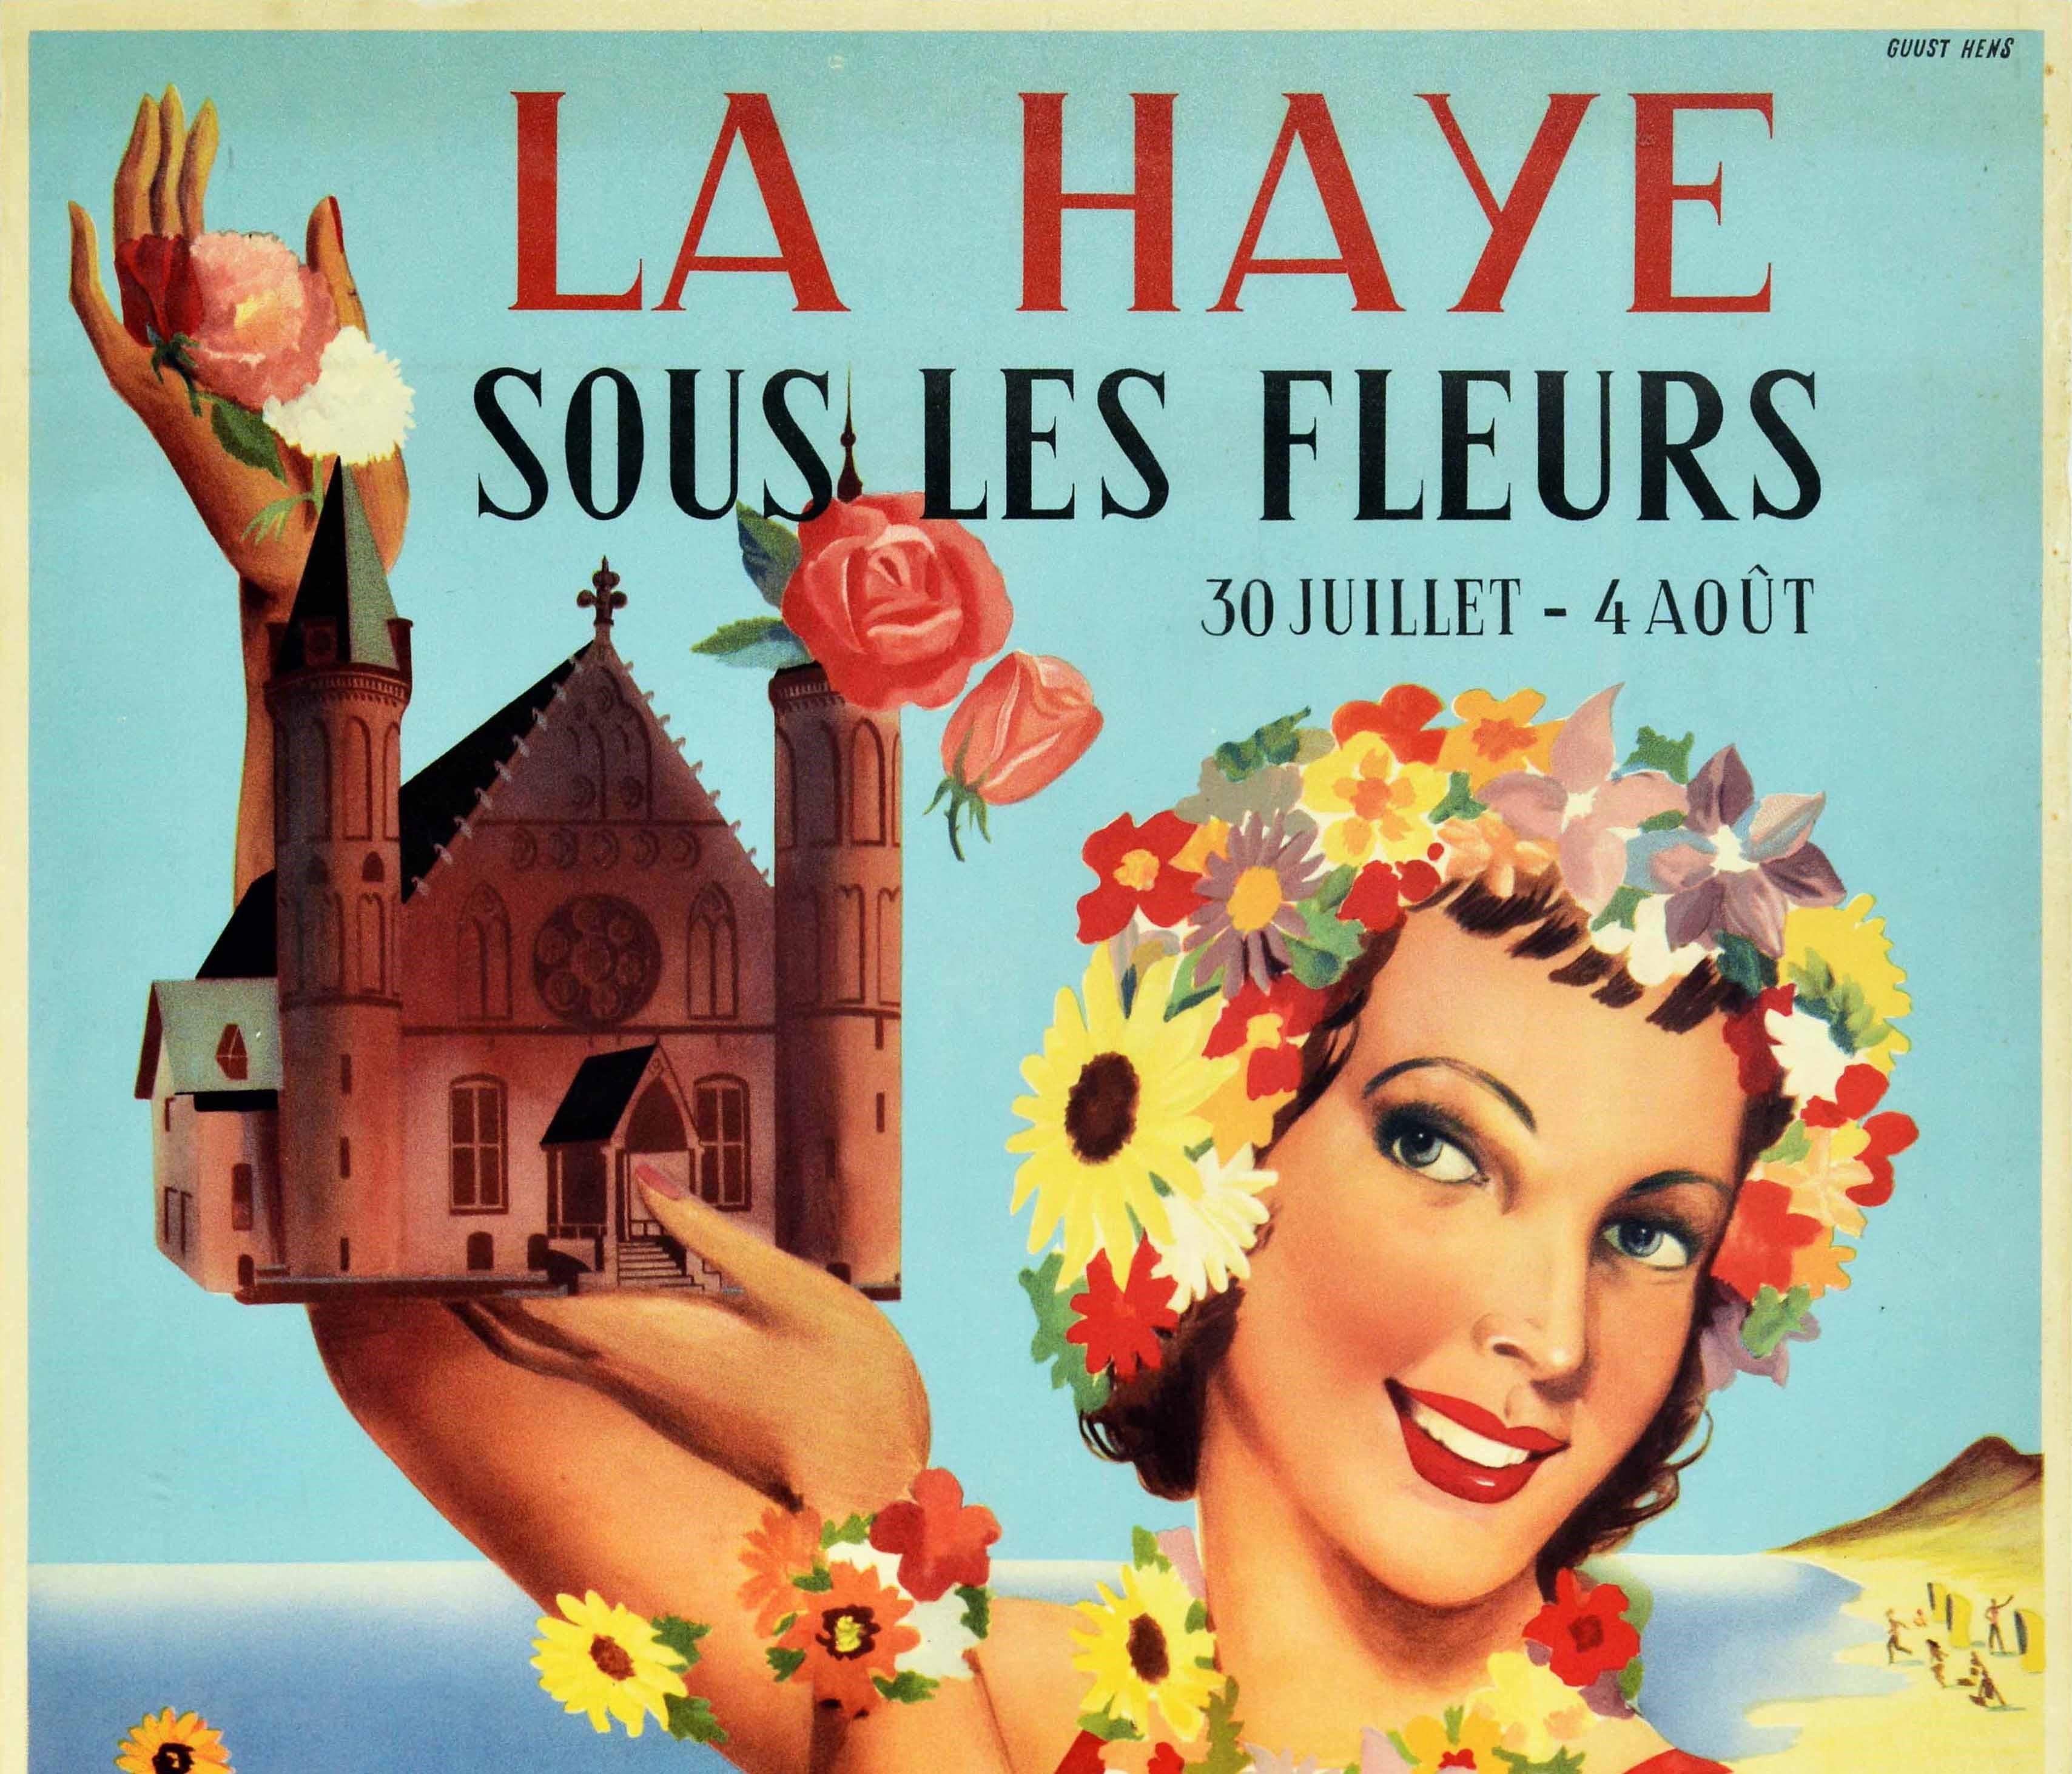 Original vintage travel poster promoting La Haye sous les Fleurs flower festival held from 30 July to 4 August 1951 in the Hague Netherlands featuring a smiling lady holding up roses and the historic 13th century Ridderzaal hall adorned with flowers